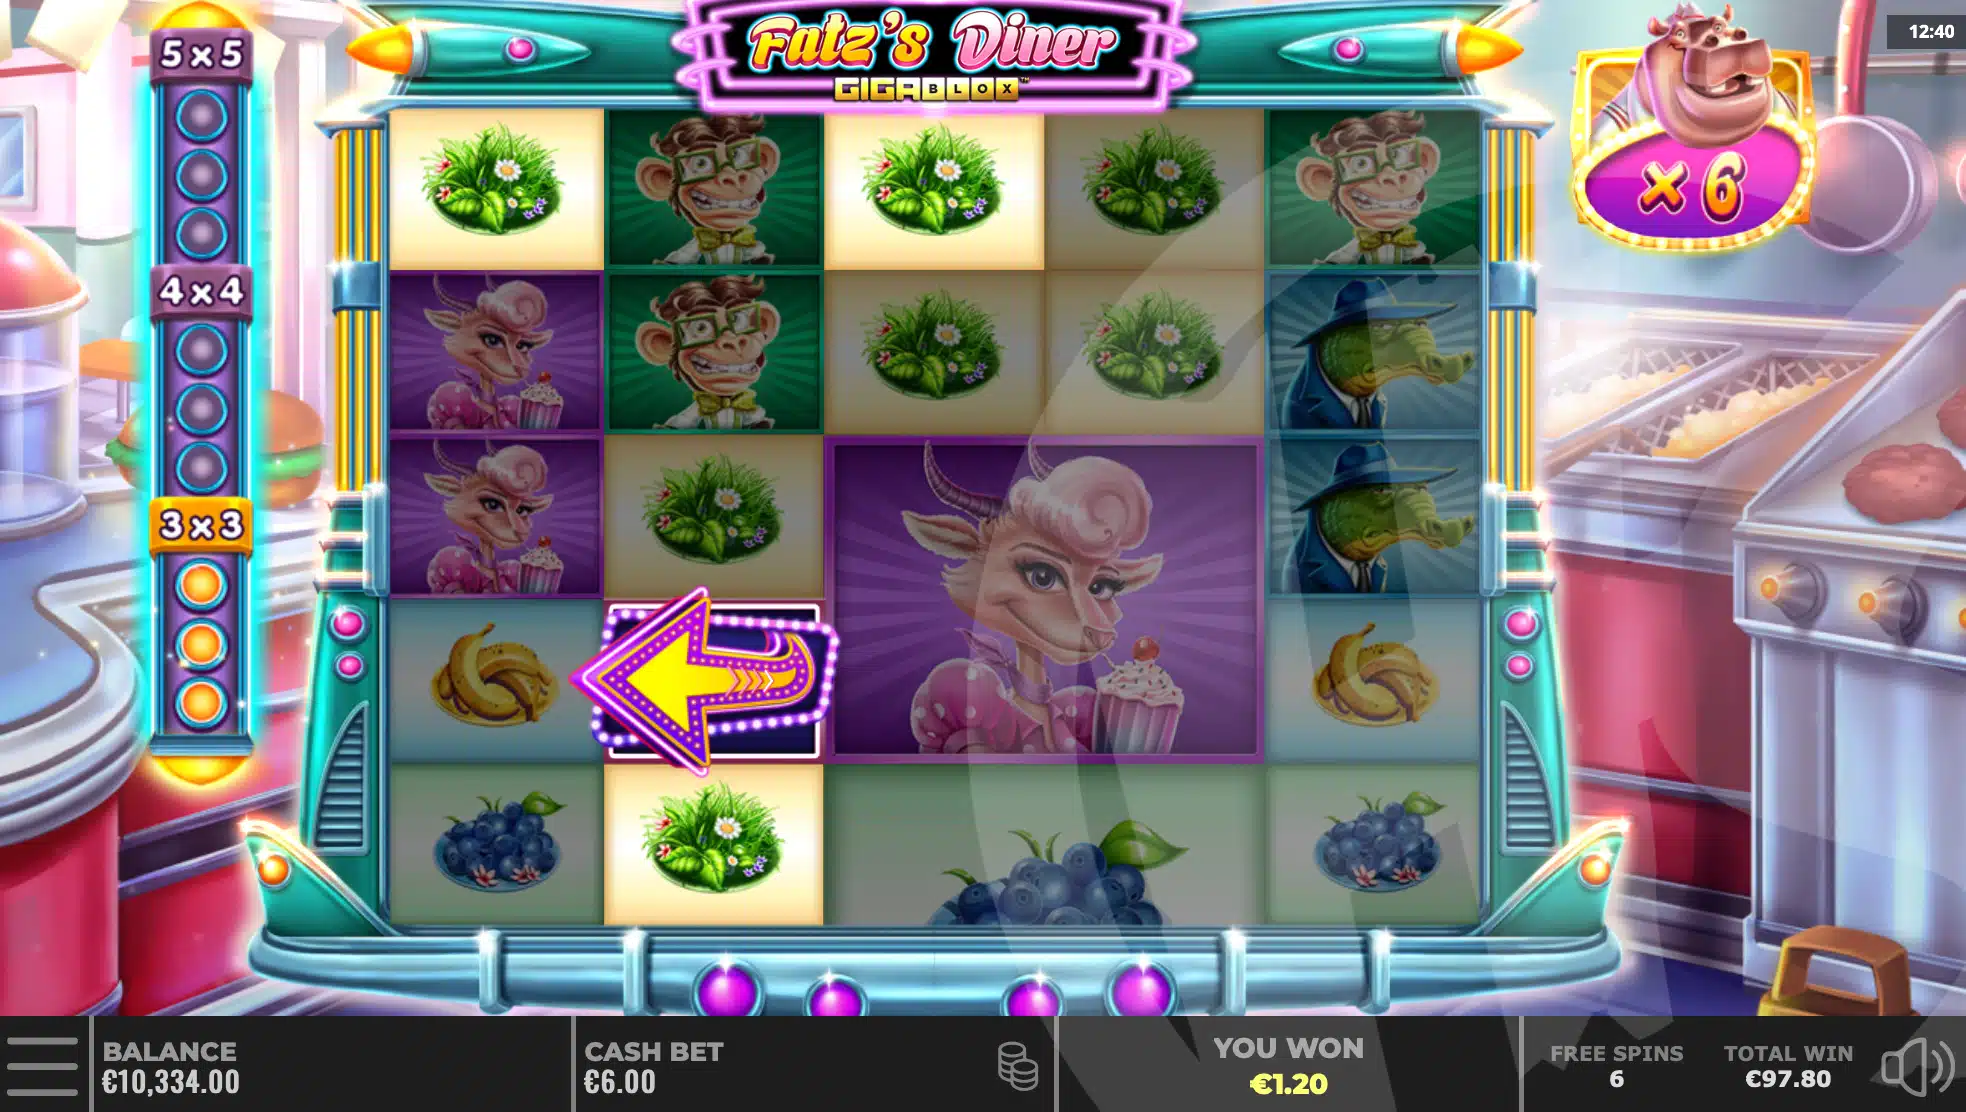 Expand & Respin Symbols are Collected During Free Spins and Increase Minimum GigaReel Sizes